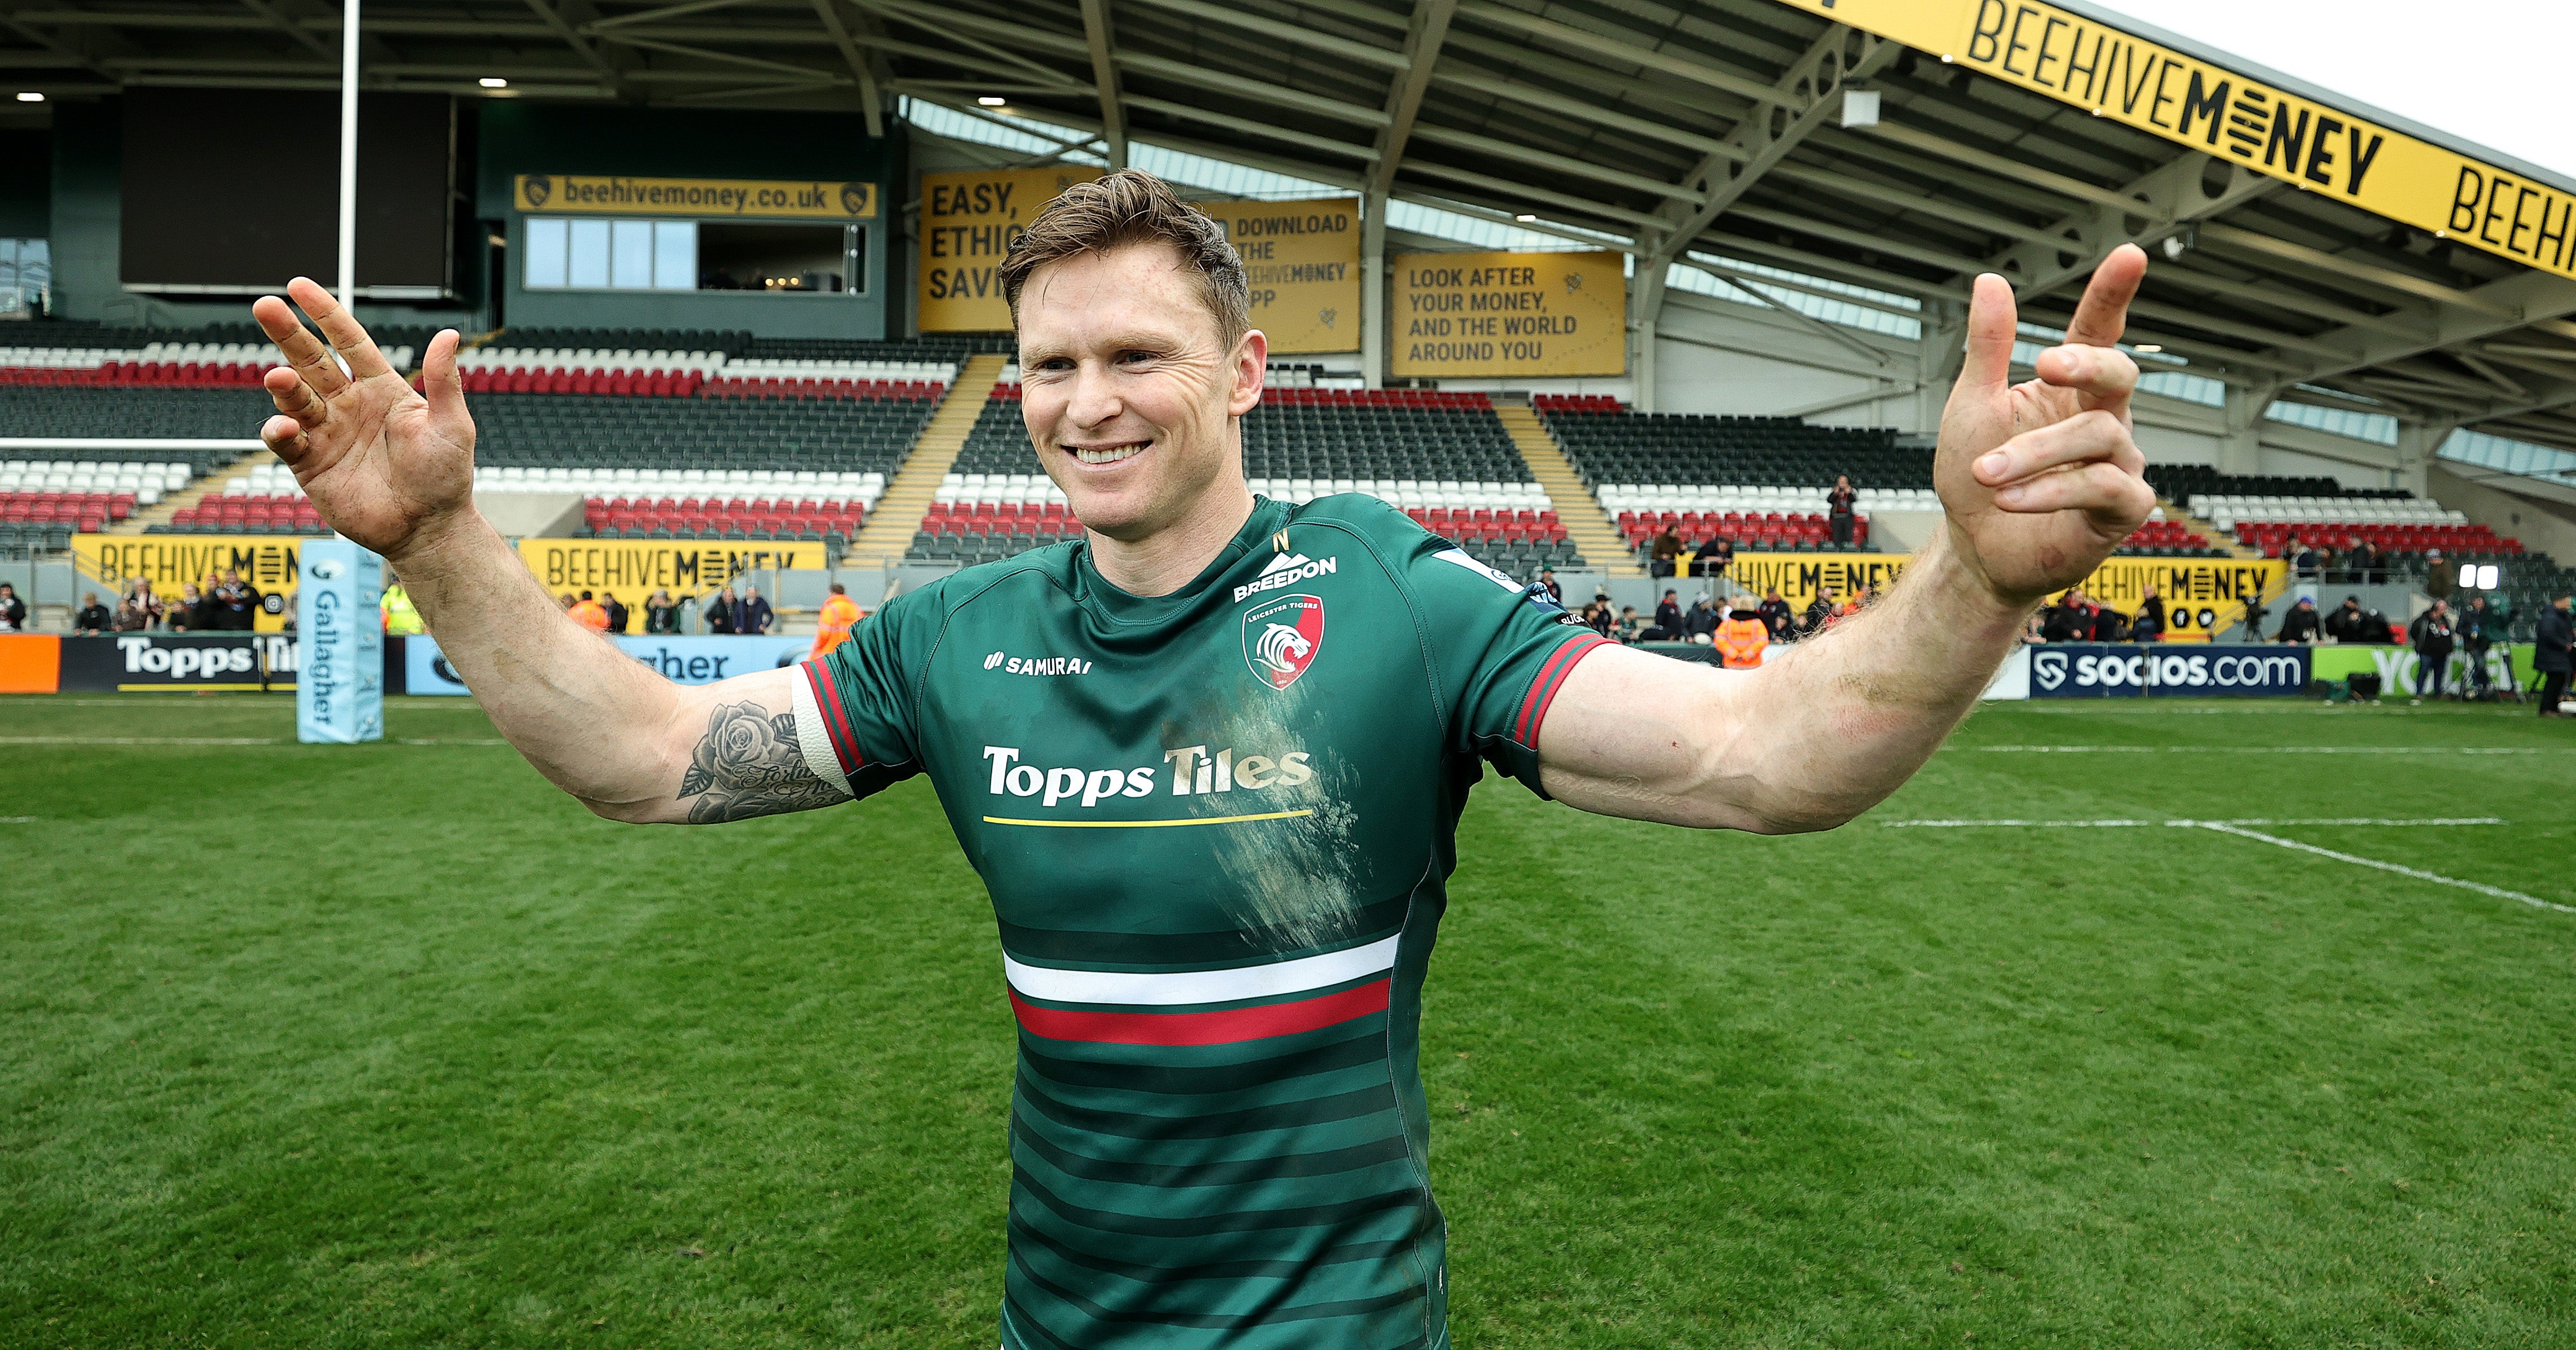 Chris Ashton is the greatest try scorer in Gallagher Premiership history